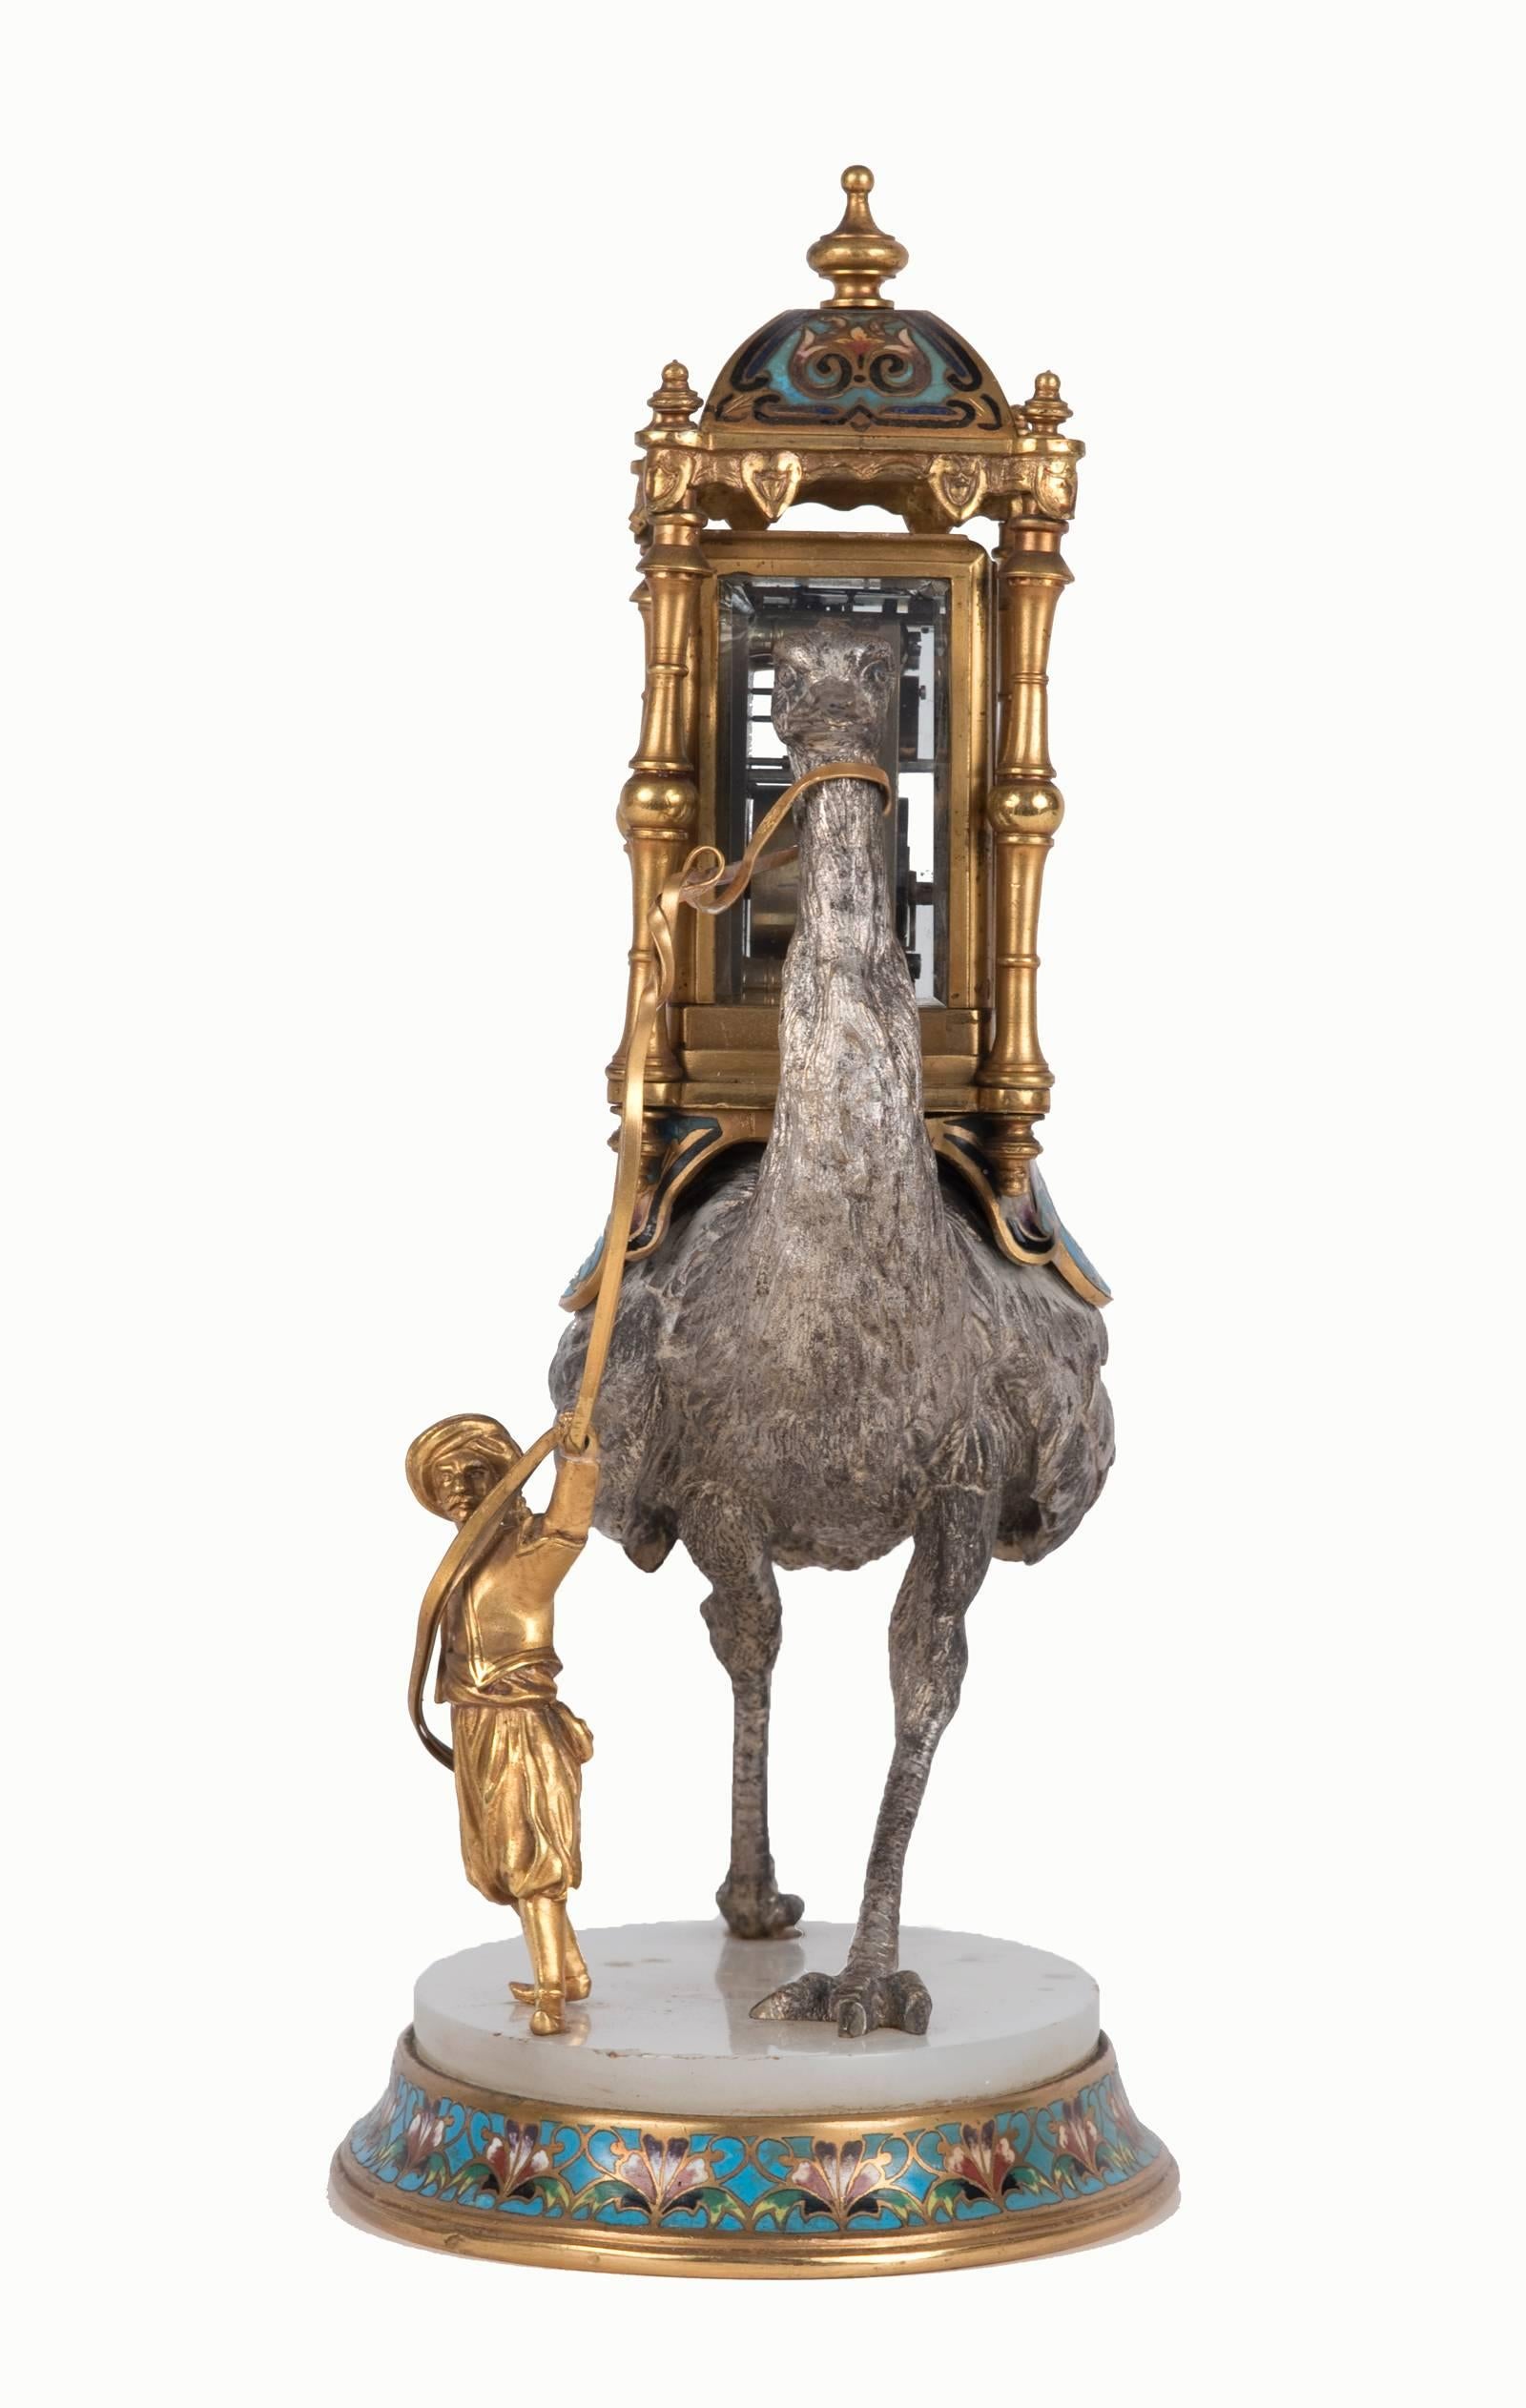 Polished Gilt and Silvered Bronze and Cloisonné Figural Clock